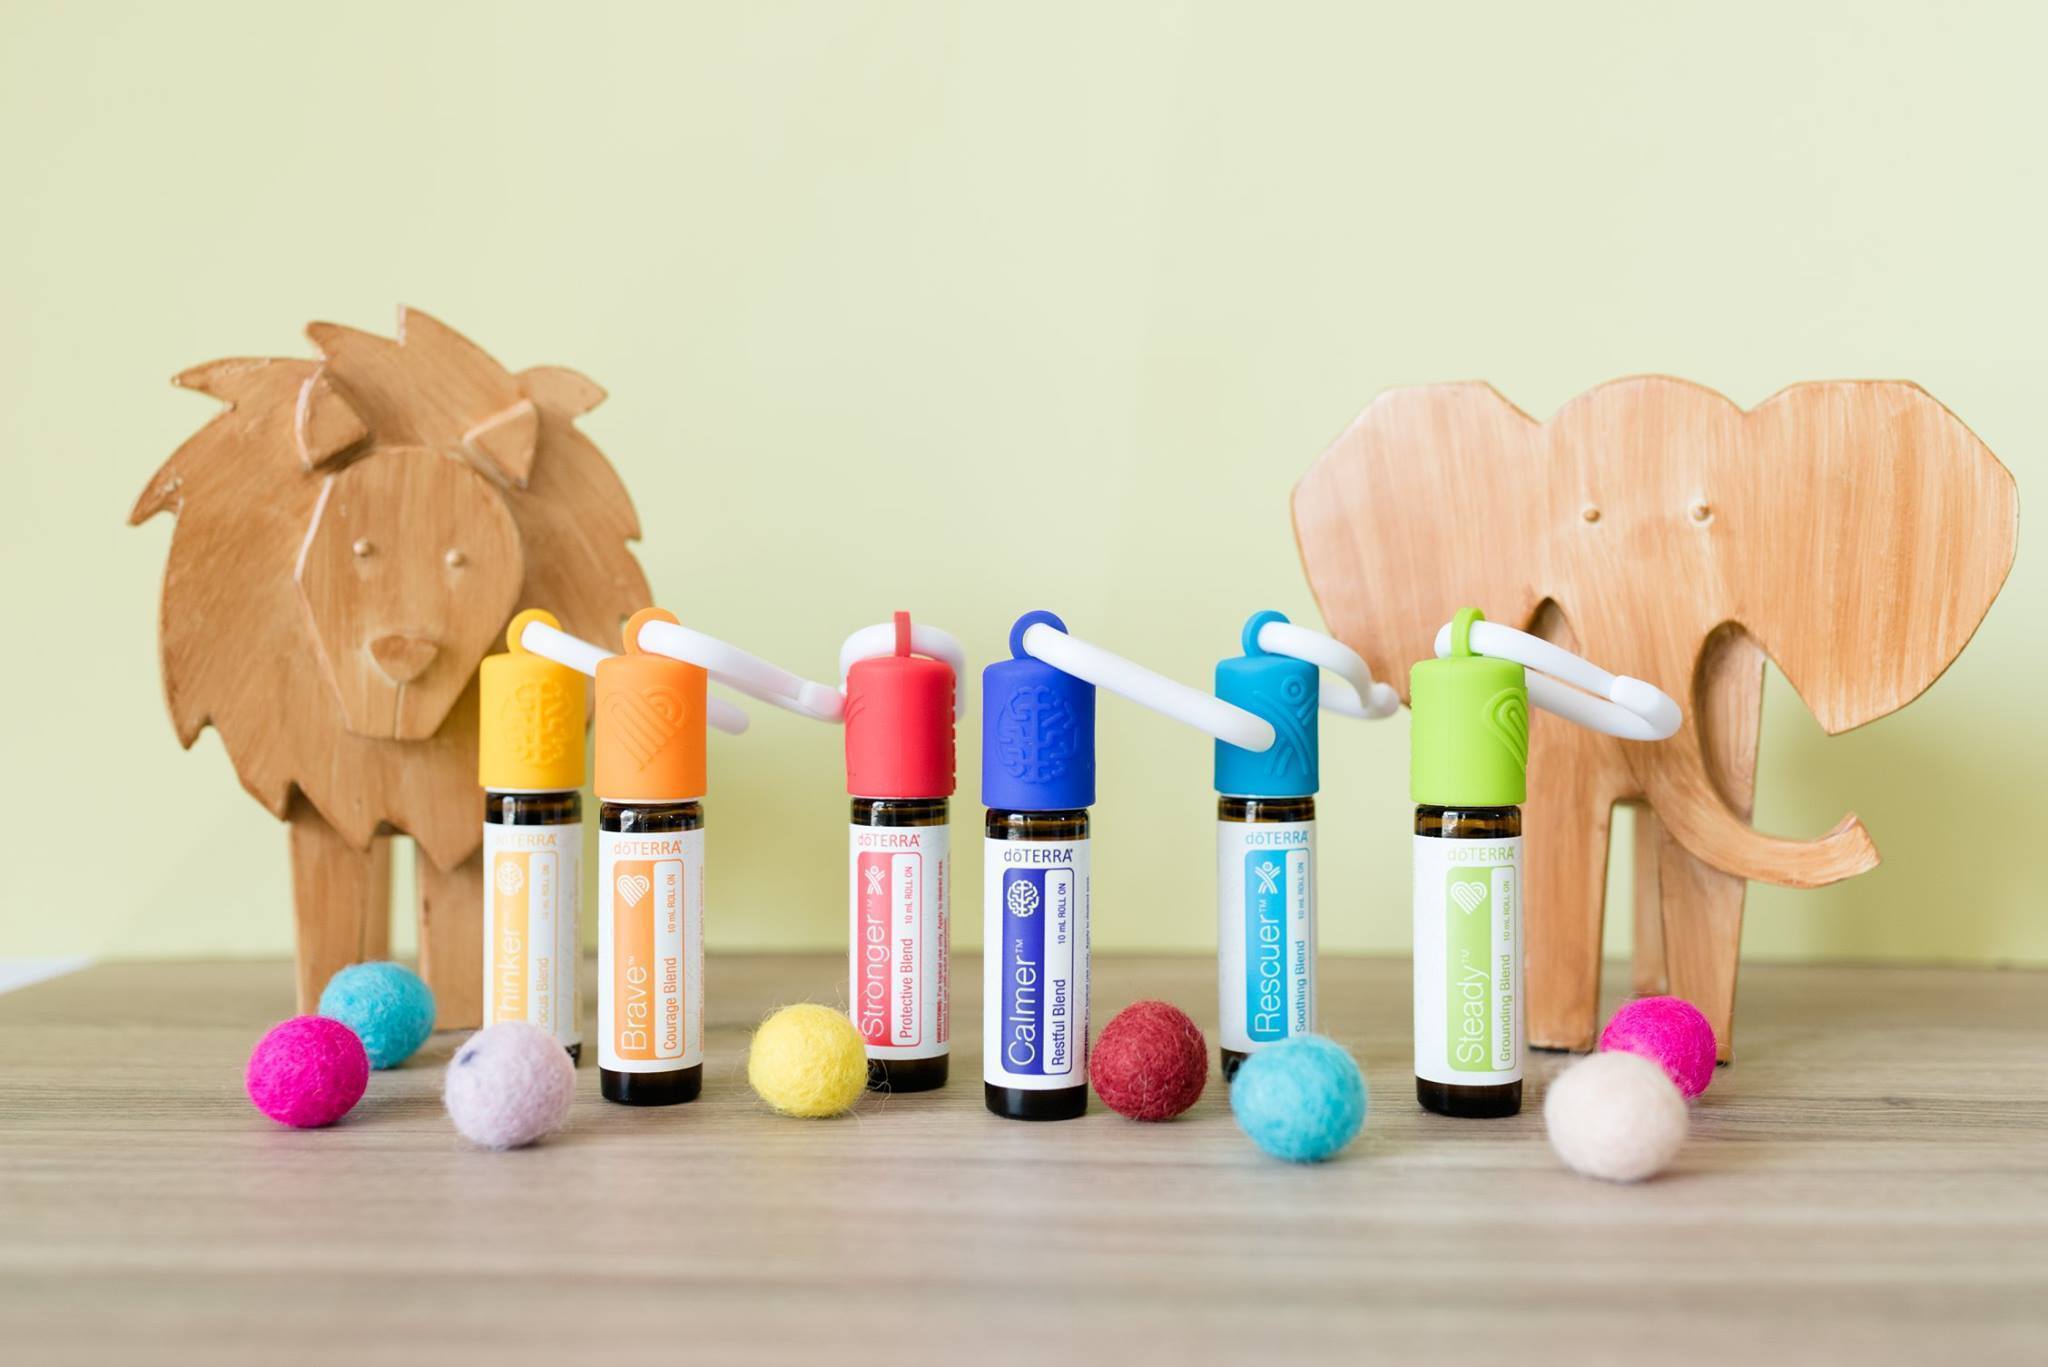 doTERRA Kids Collection